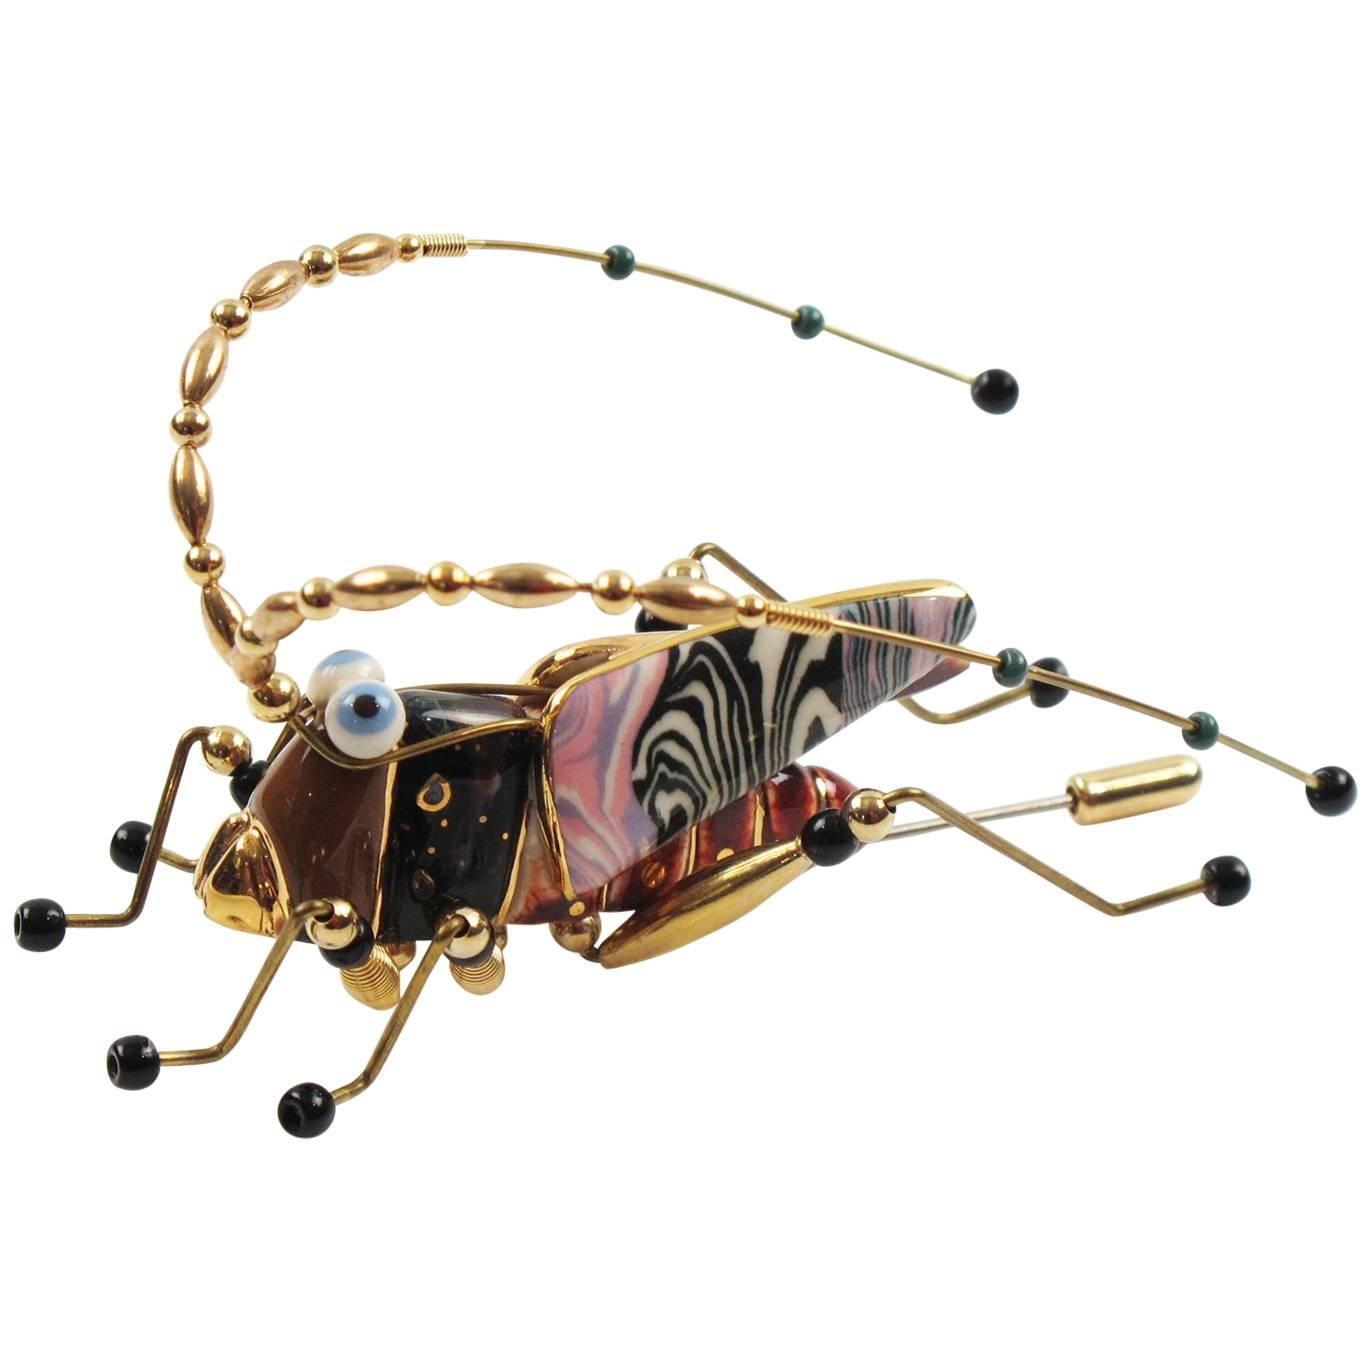 Enameled Porcelain Grasshopper Pin Brooch by Cynthia Chuang for Jewelry 10